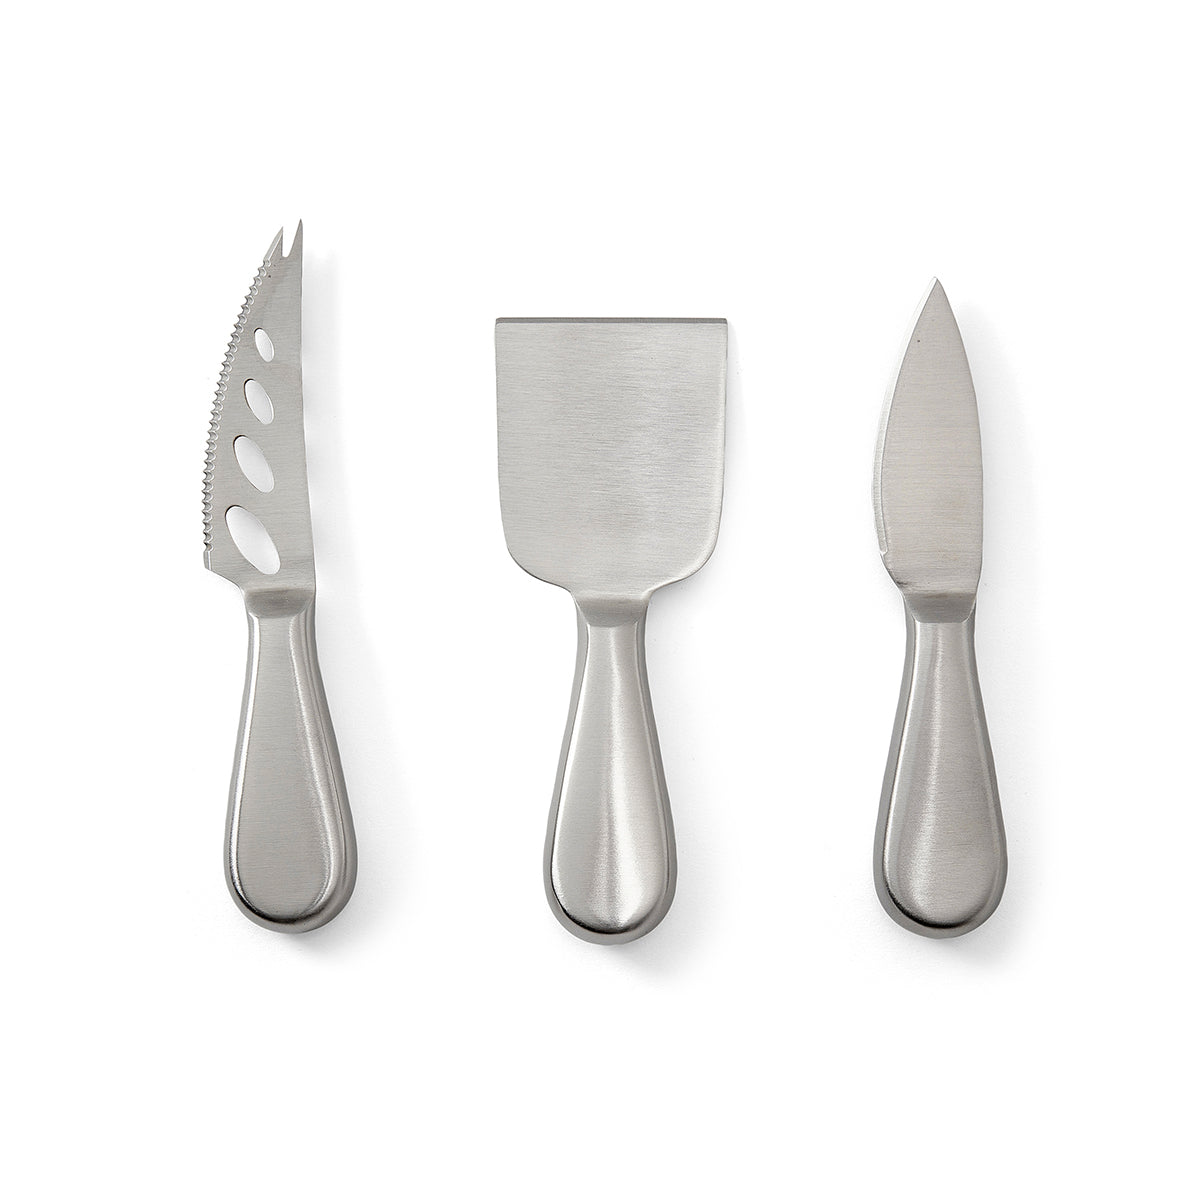 The Essentials Cheese Tools